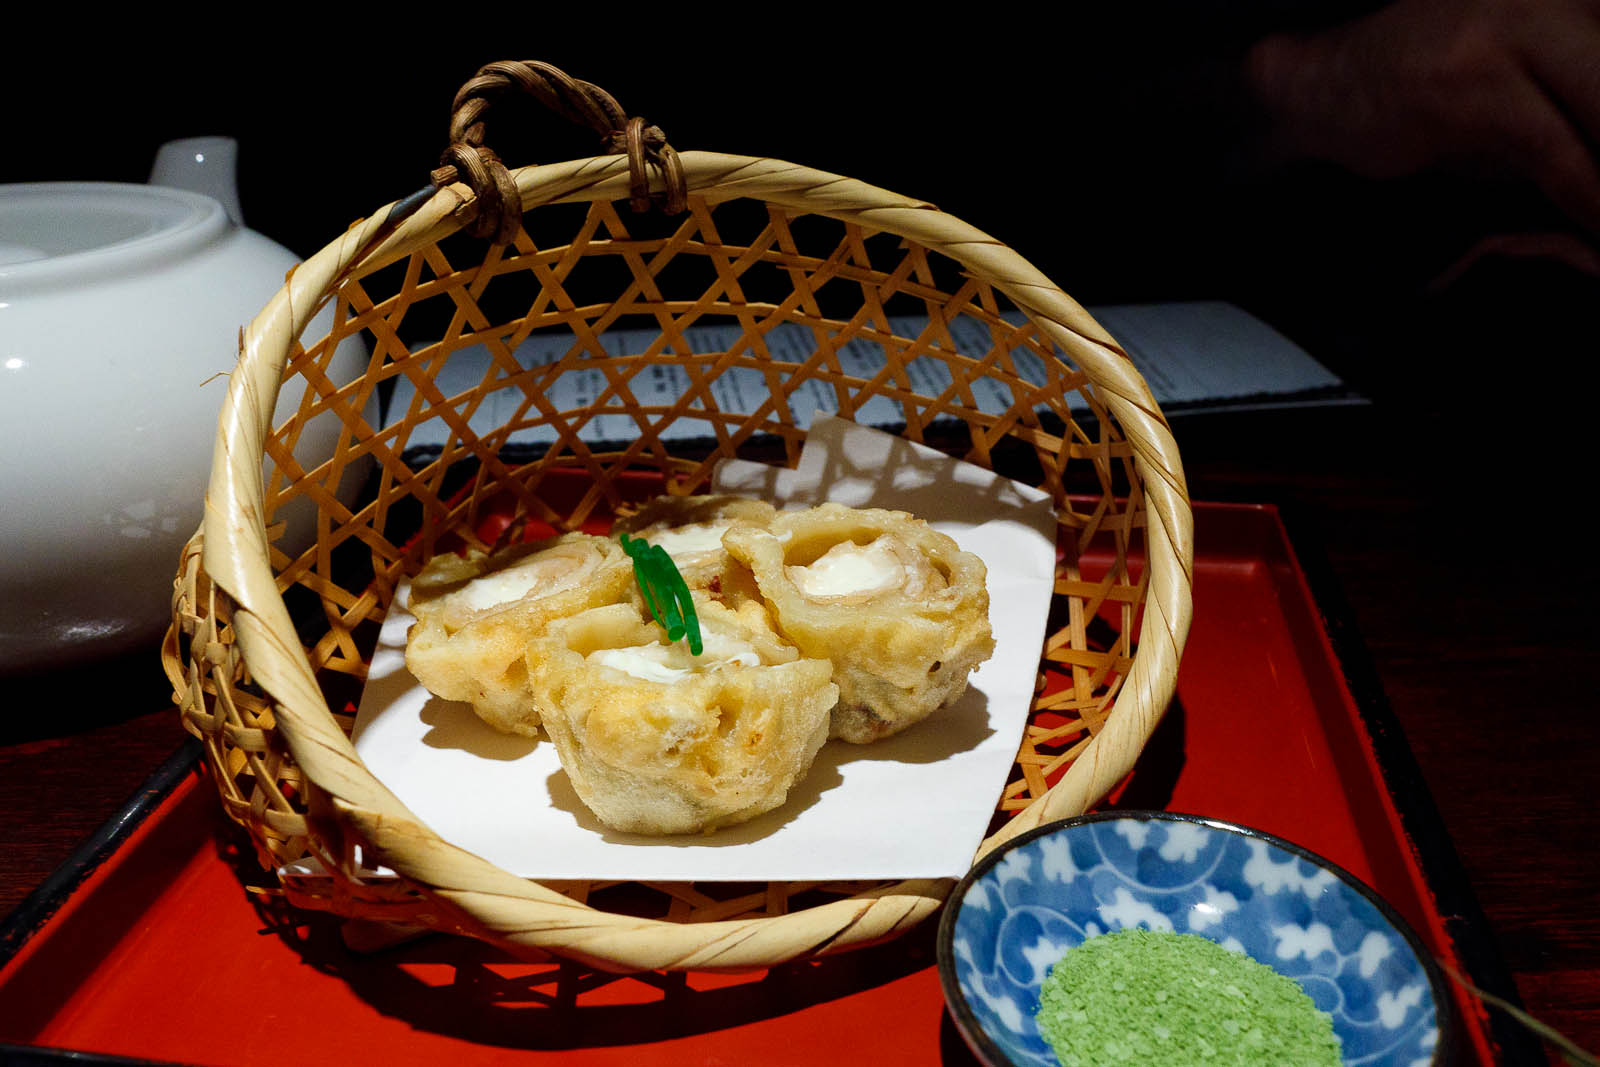 Anago & cream cheese tempura: cream cheese wrapped with soft seawater eel ($9.95)